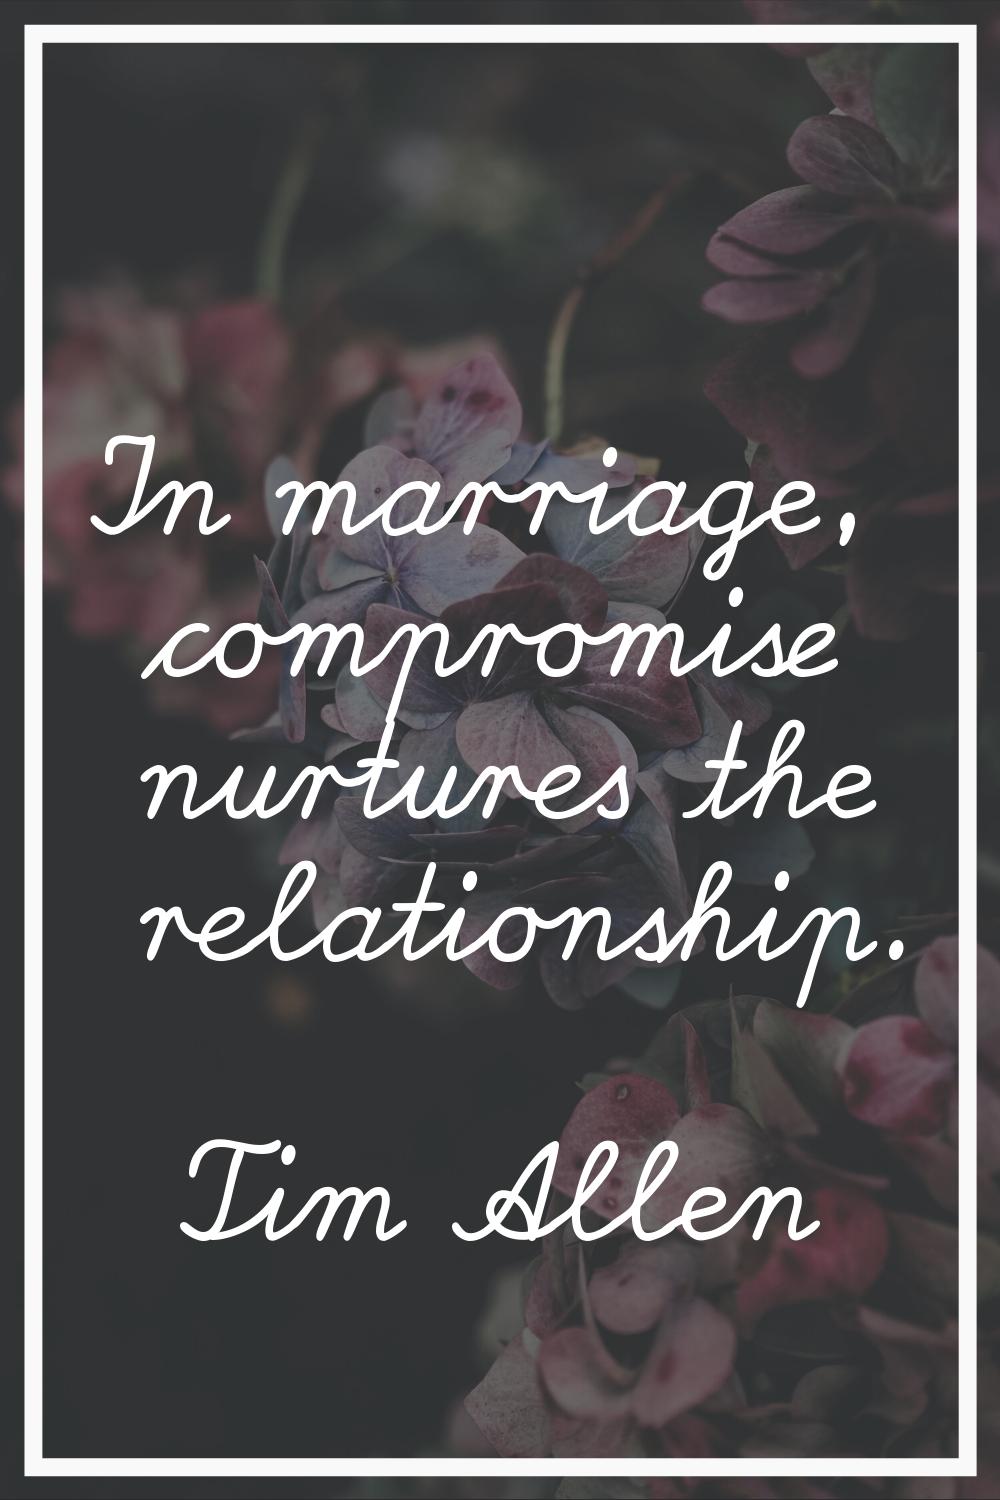 In marriage, compromise nurtures the relationship.